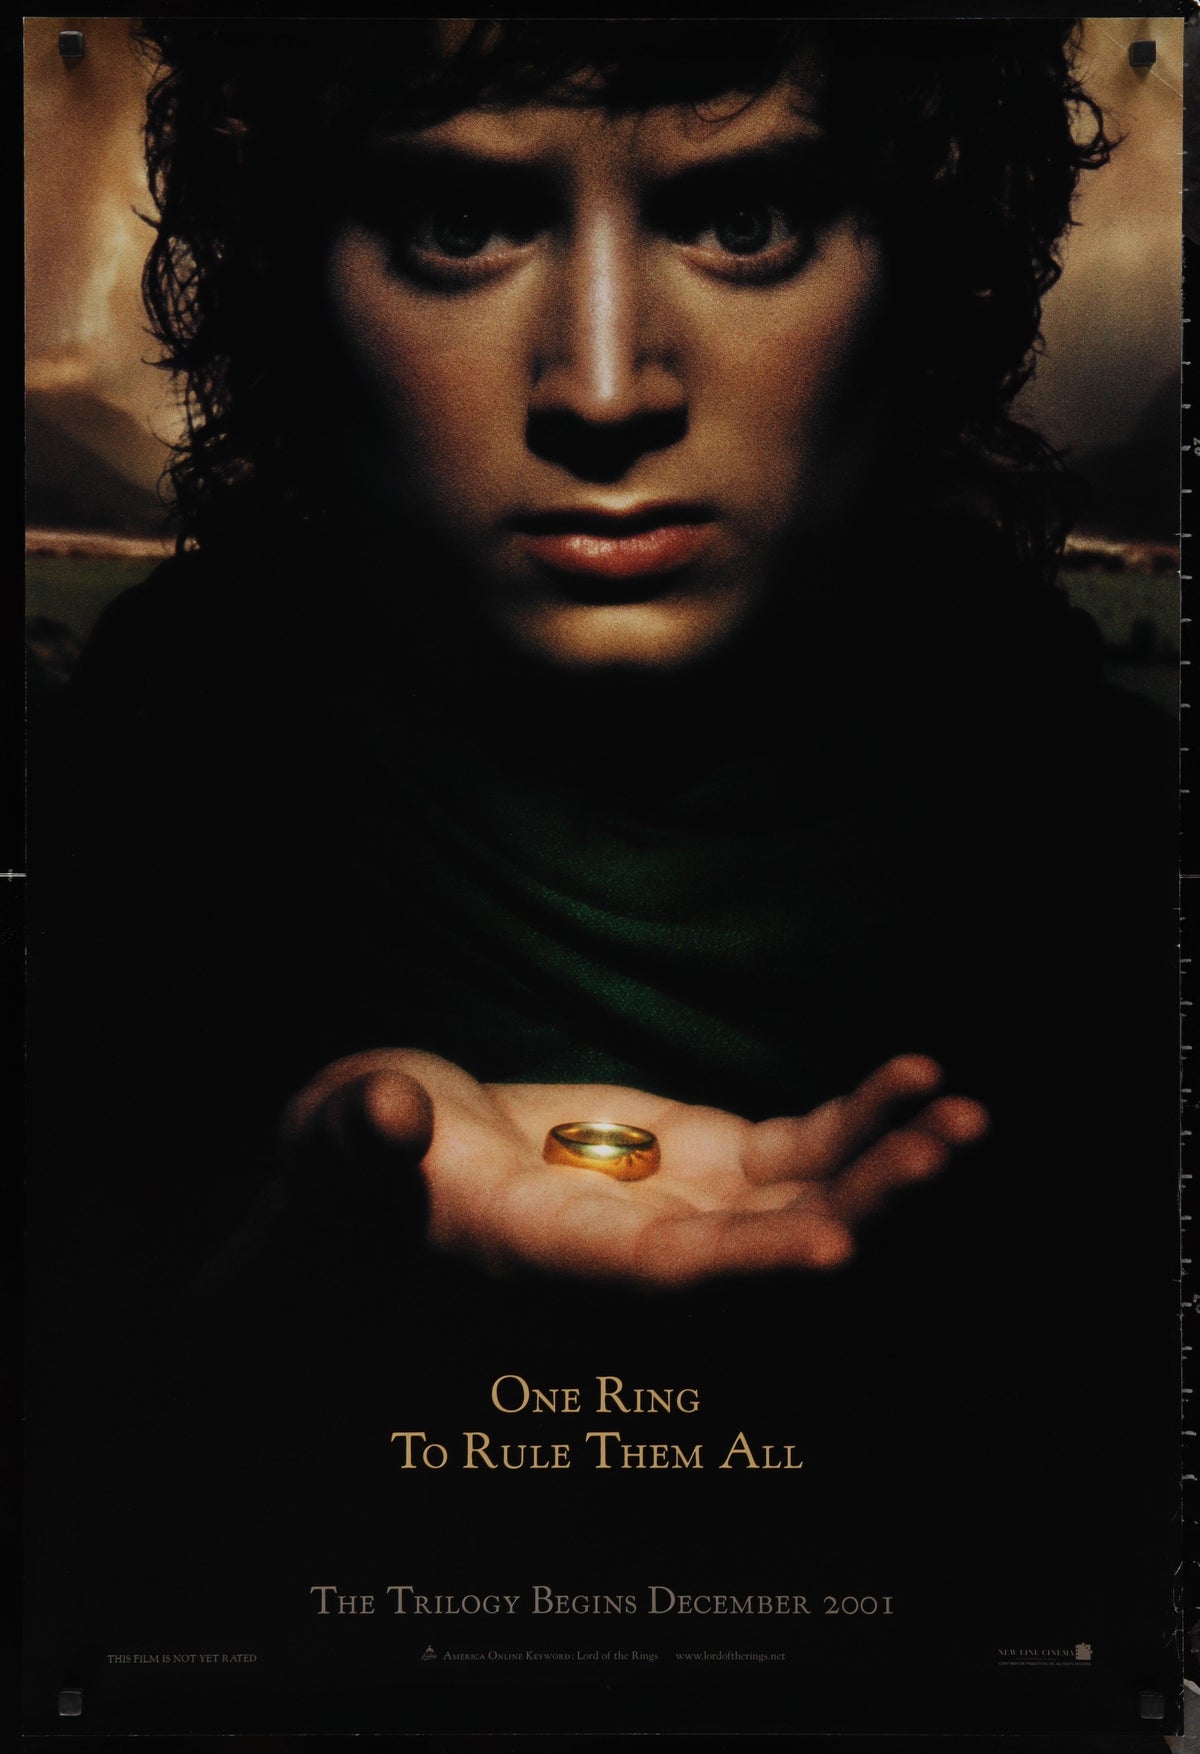 The Lord of the Rings: The Fellowship of the Ring 1 Sheet (27x41) Original Vintage Movie Poster